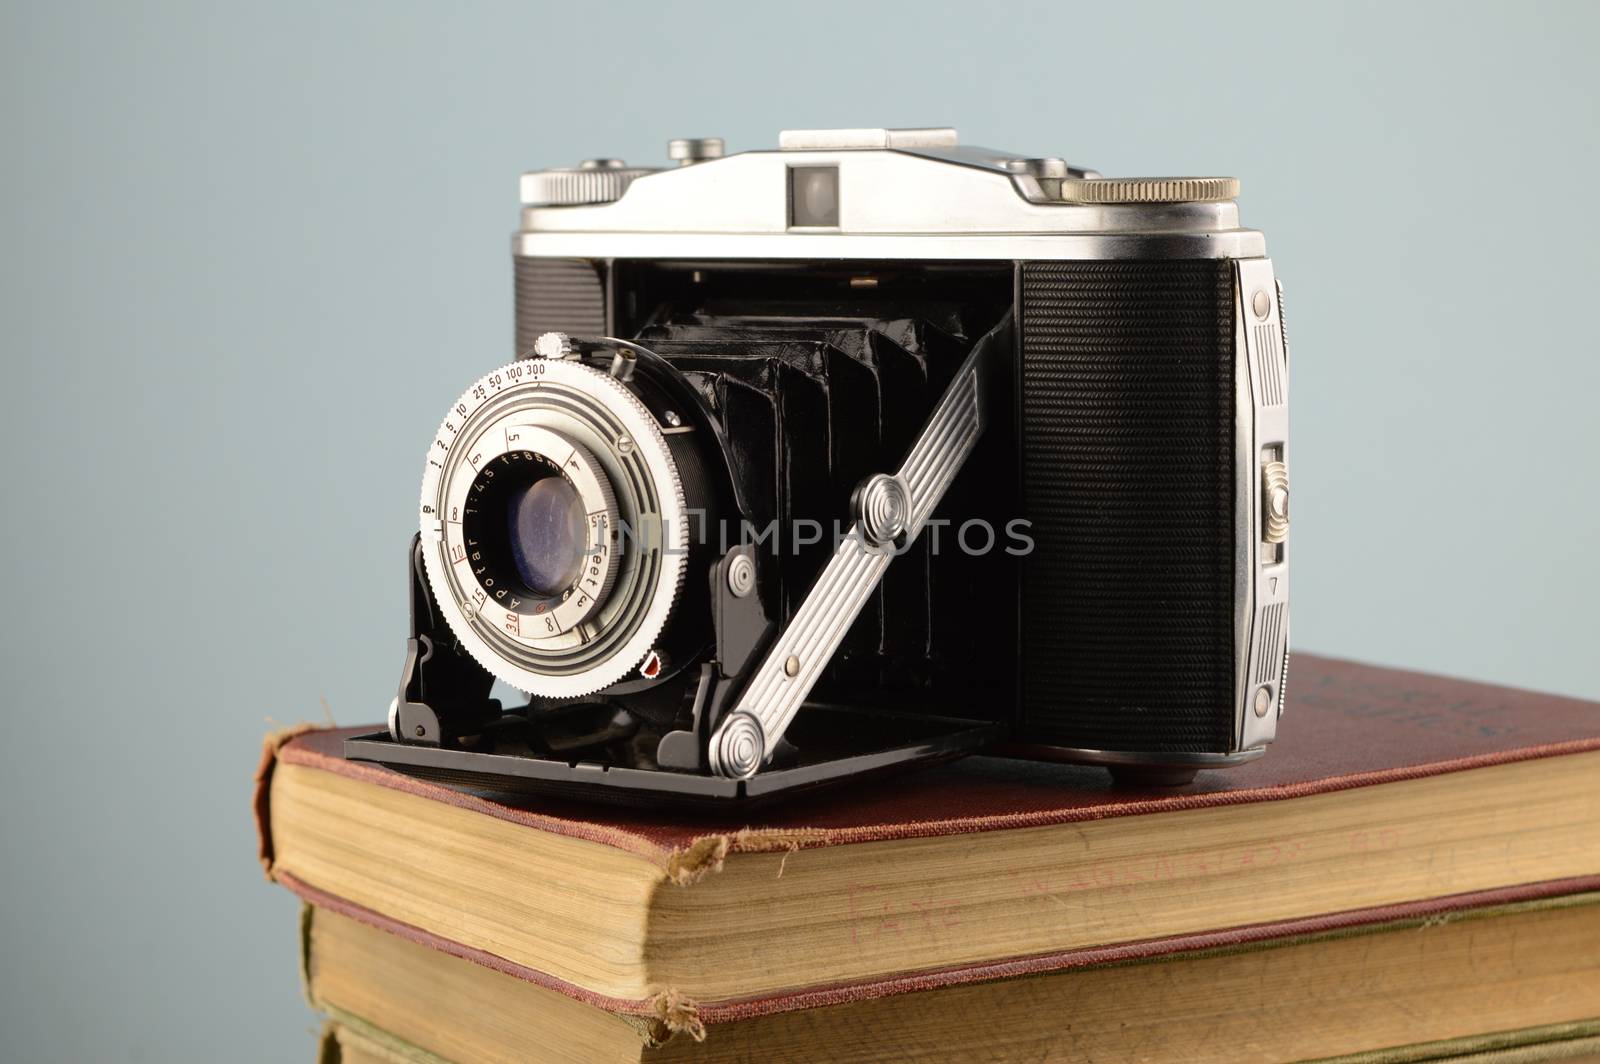 A vintage camera resting on a stack of old books.